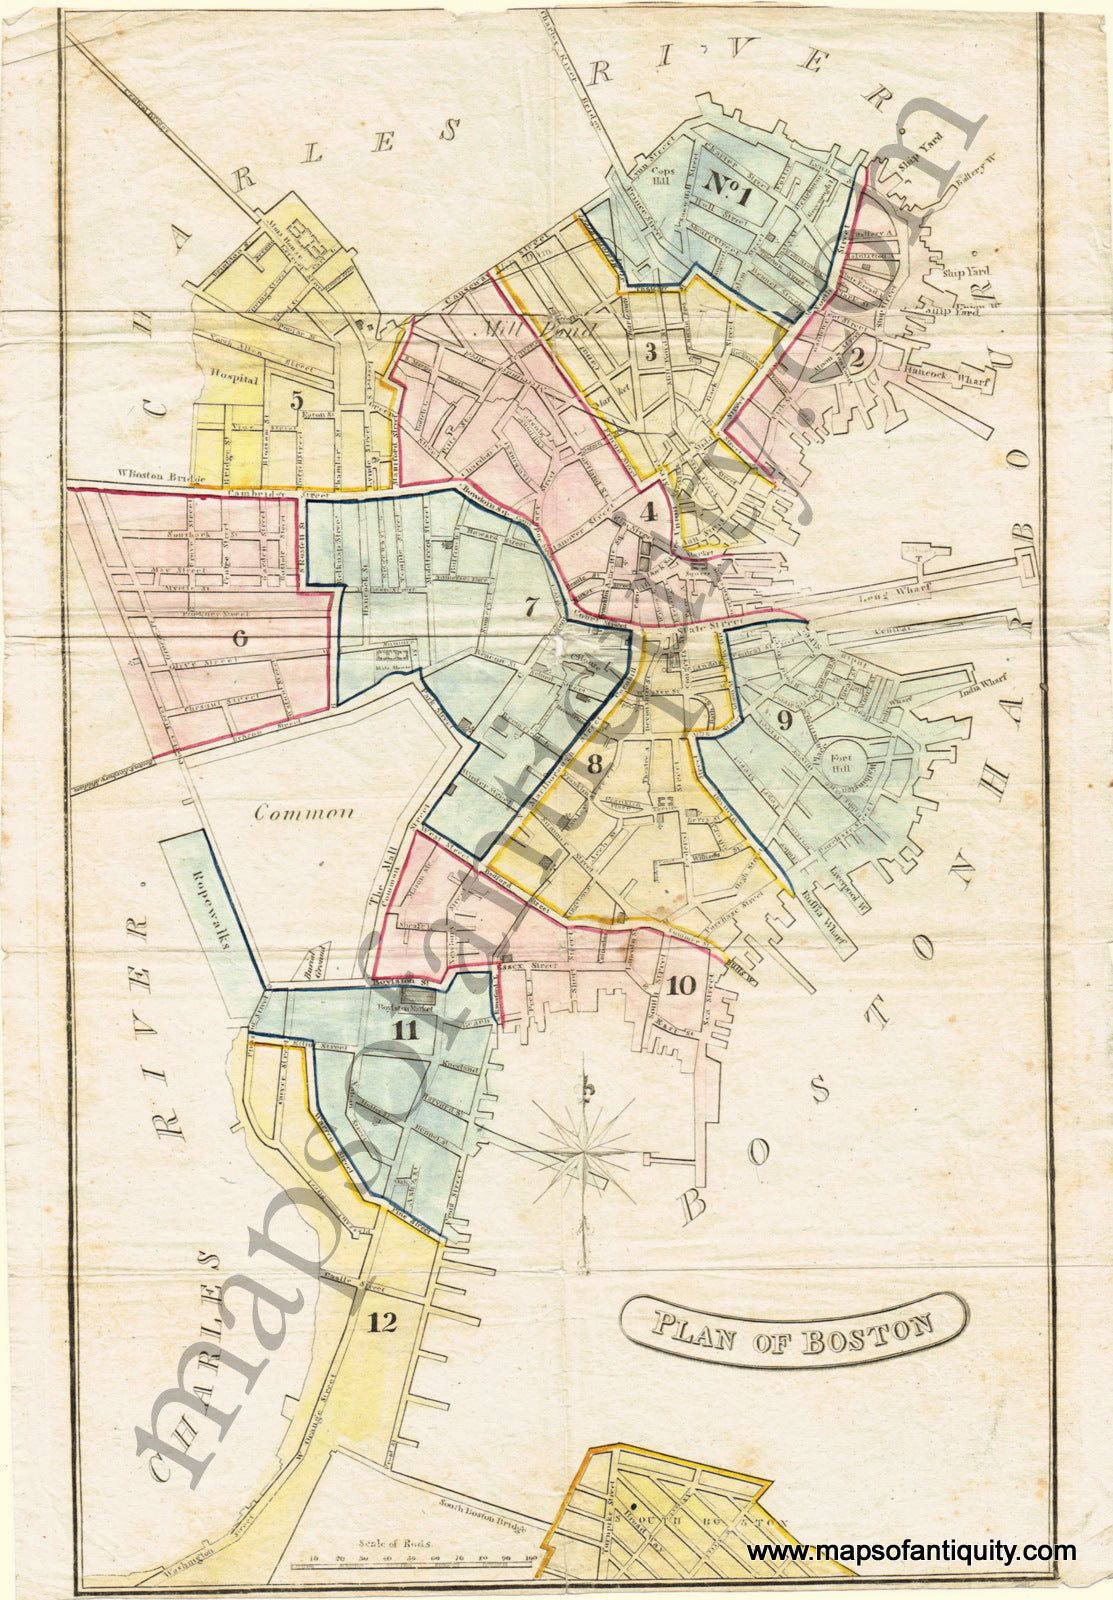 Antique-Hand-Colored-Map-Plan-of-Boston-Antique-Towns-&-City-Maps-and-Views-Massachusetts-Suffolk-County-Boston-c.-1820-Unknown-Maps-Of-Antiquity